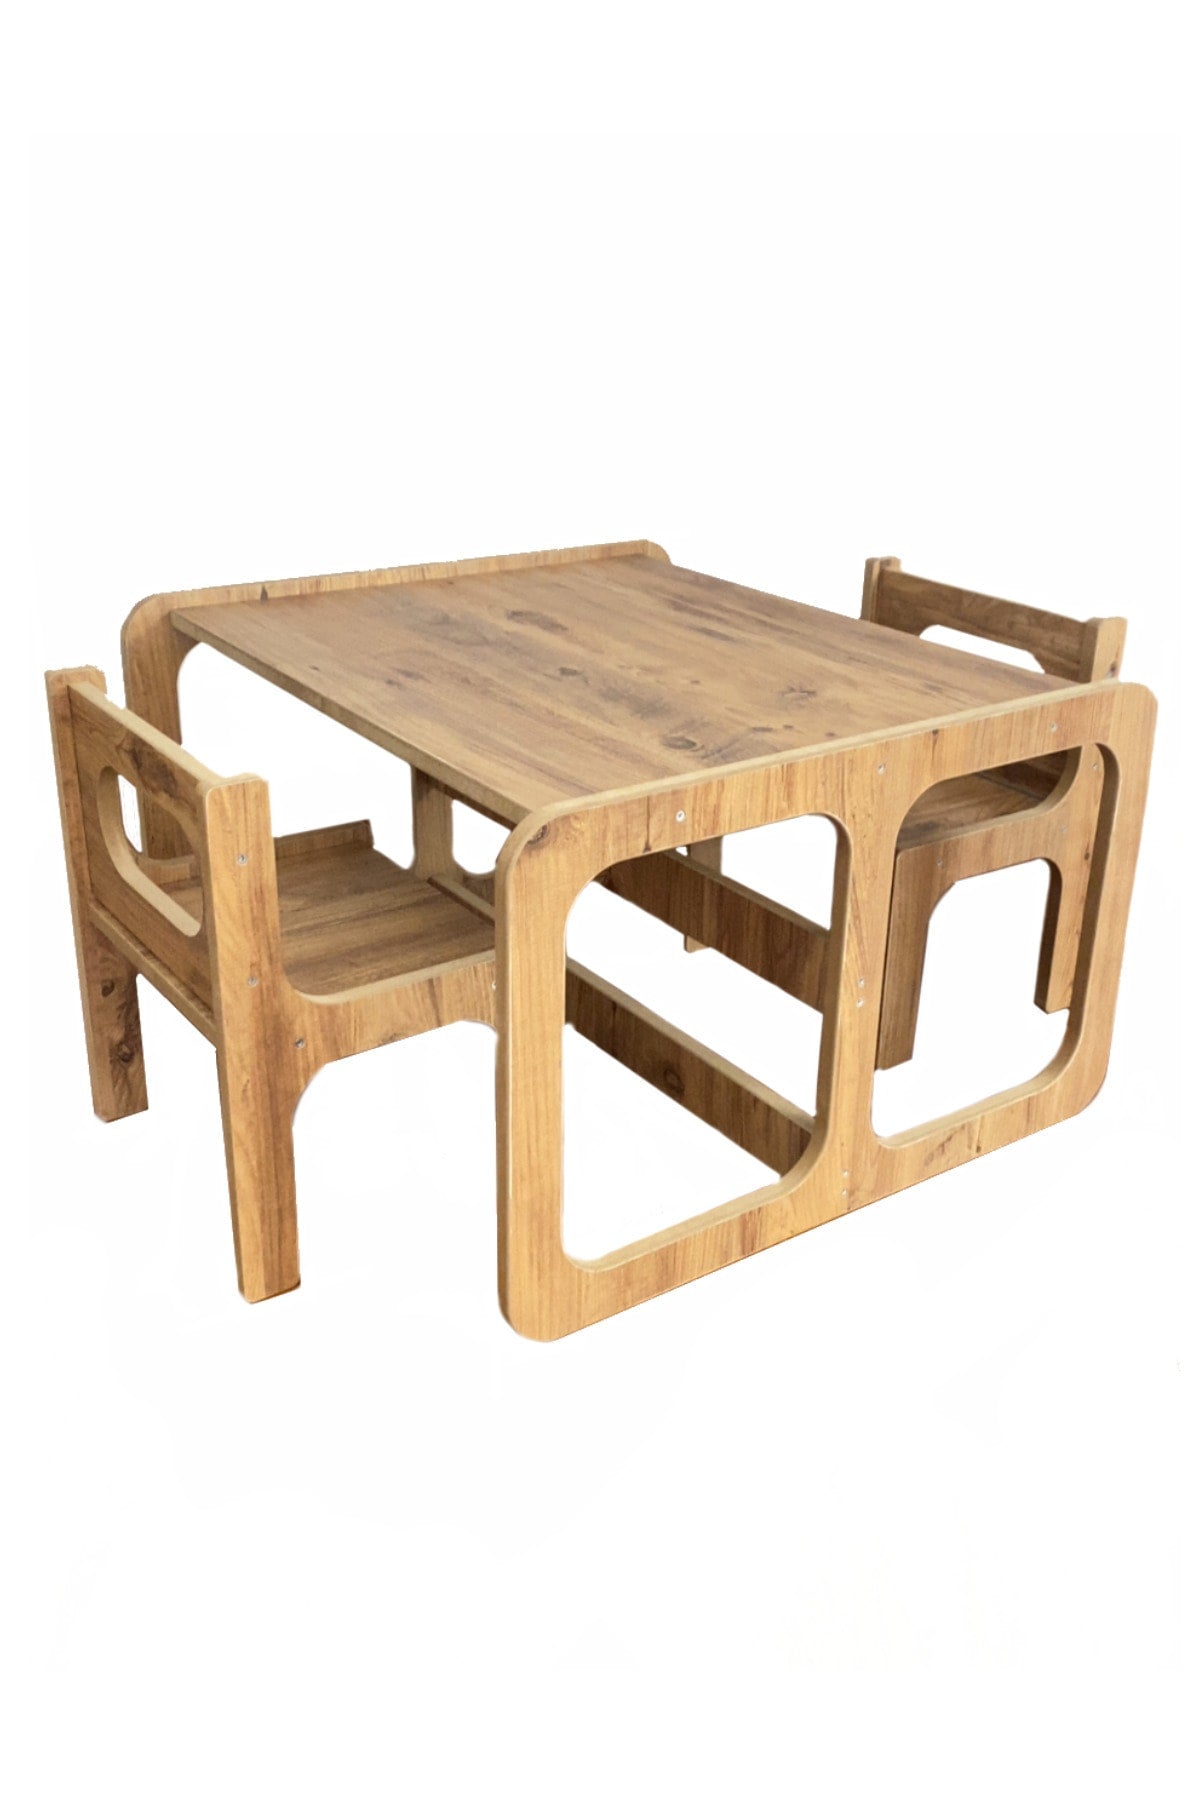 Children's Activity Table And Chair (2 Pieces) / Montessori Desk And Chair